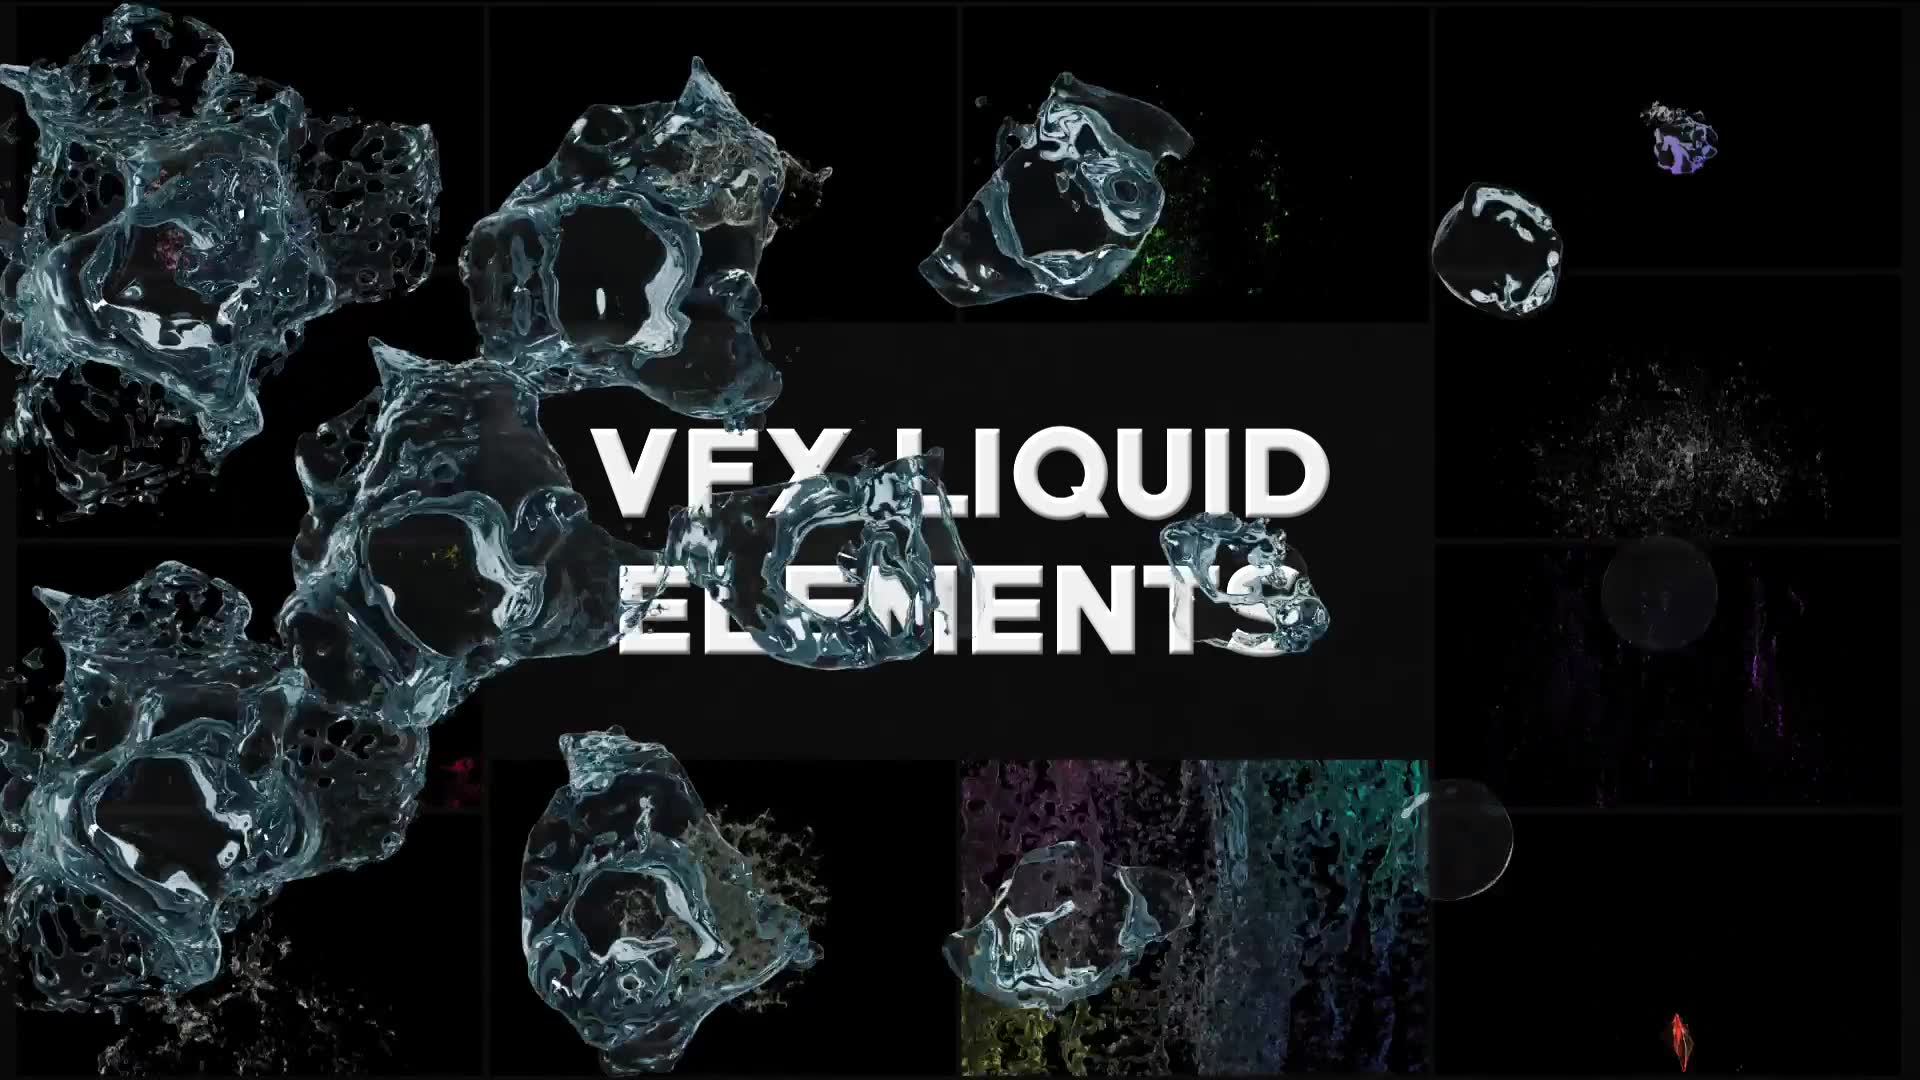 liquid elements after effects download free